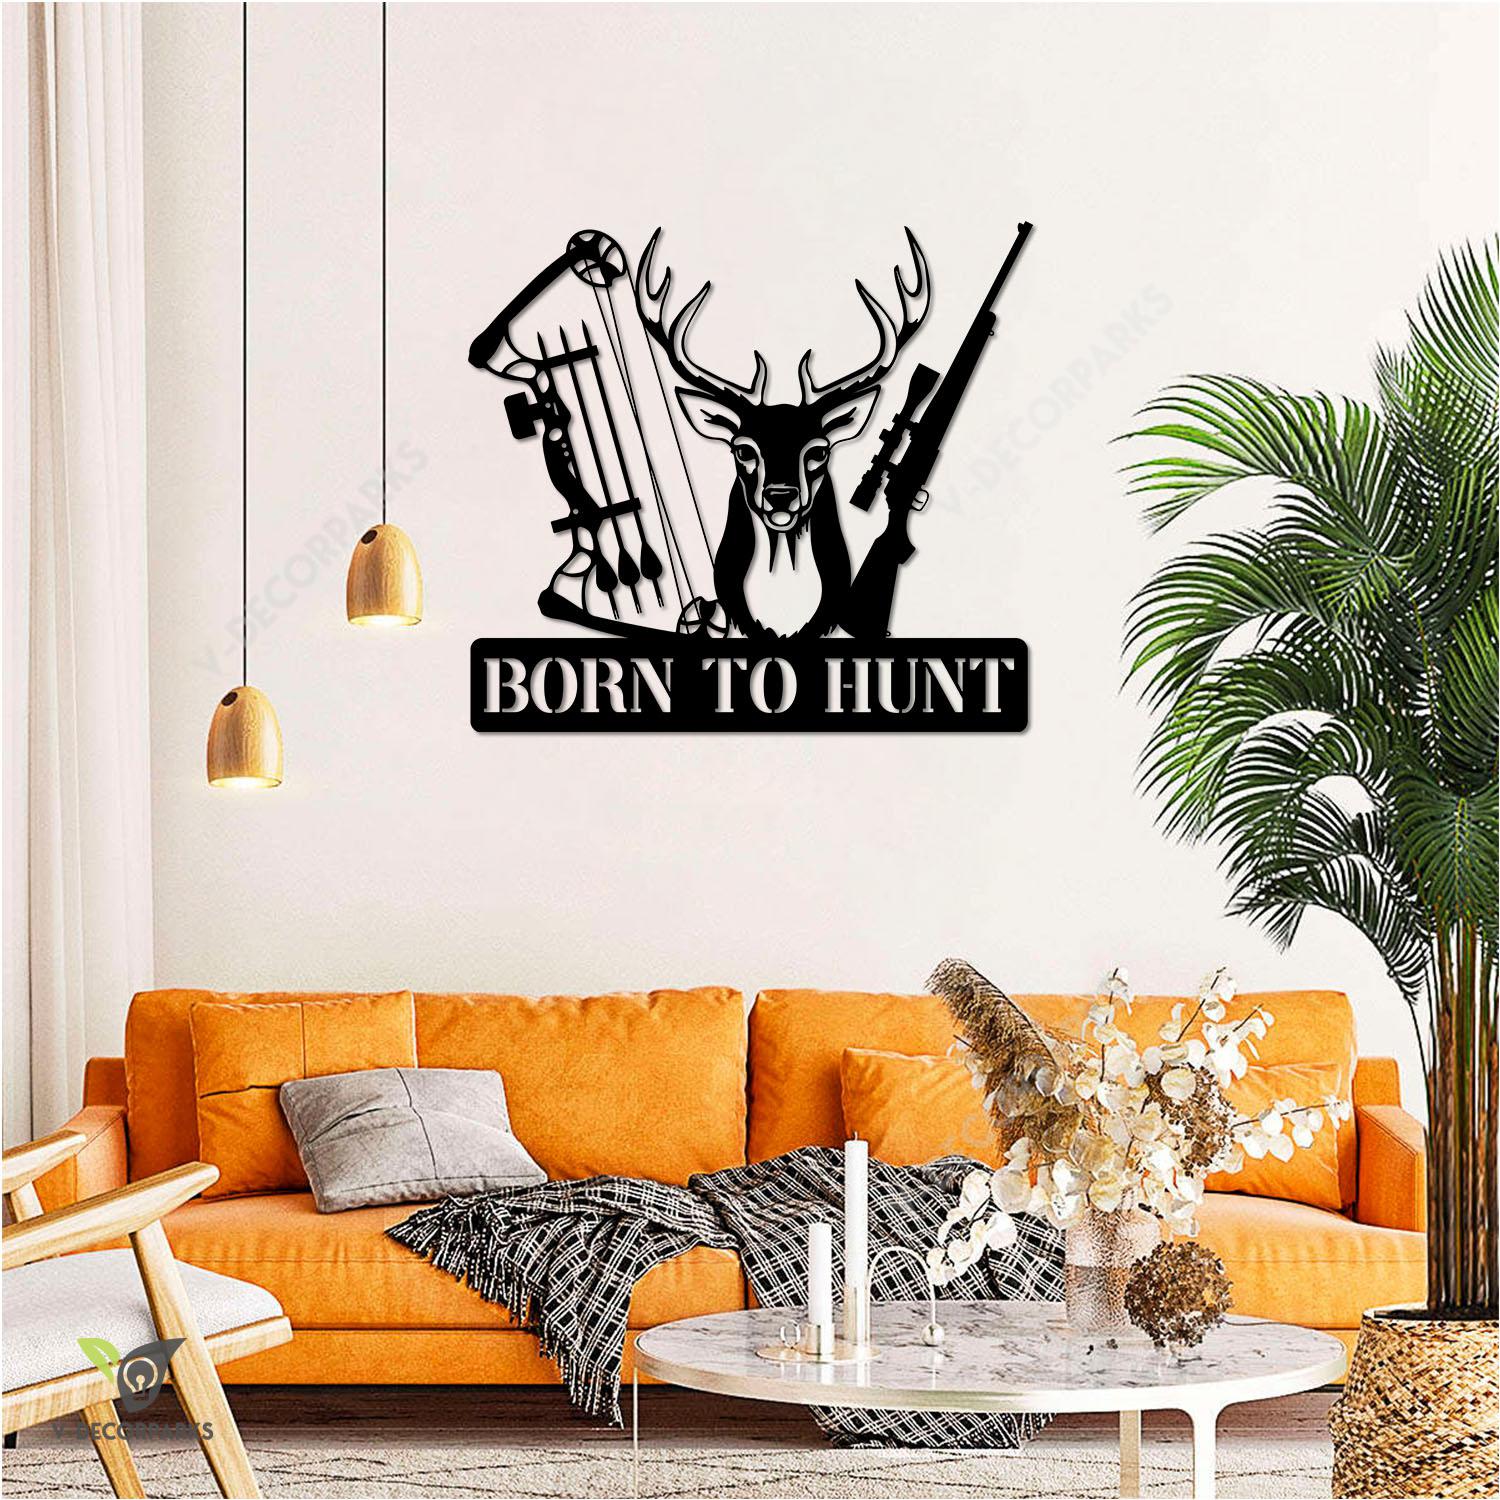 Born To Hunt Deer, Compound Bow, Hunting Rifle Metal Art, Gift For Hunters Metal Sign